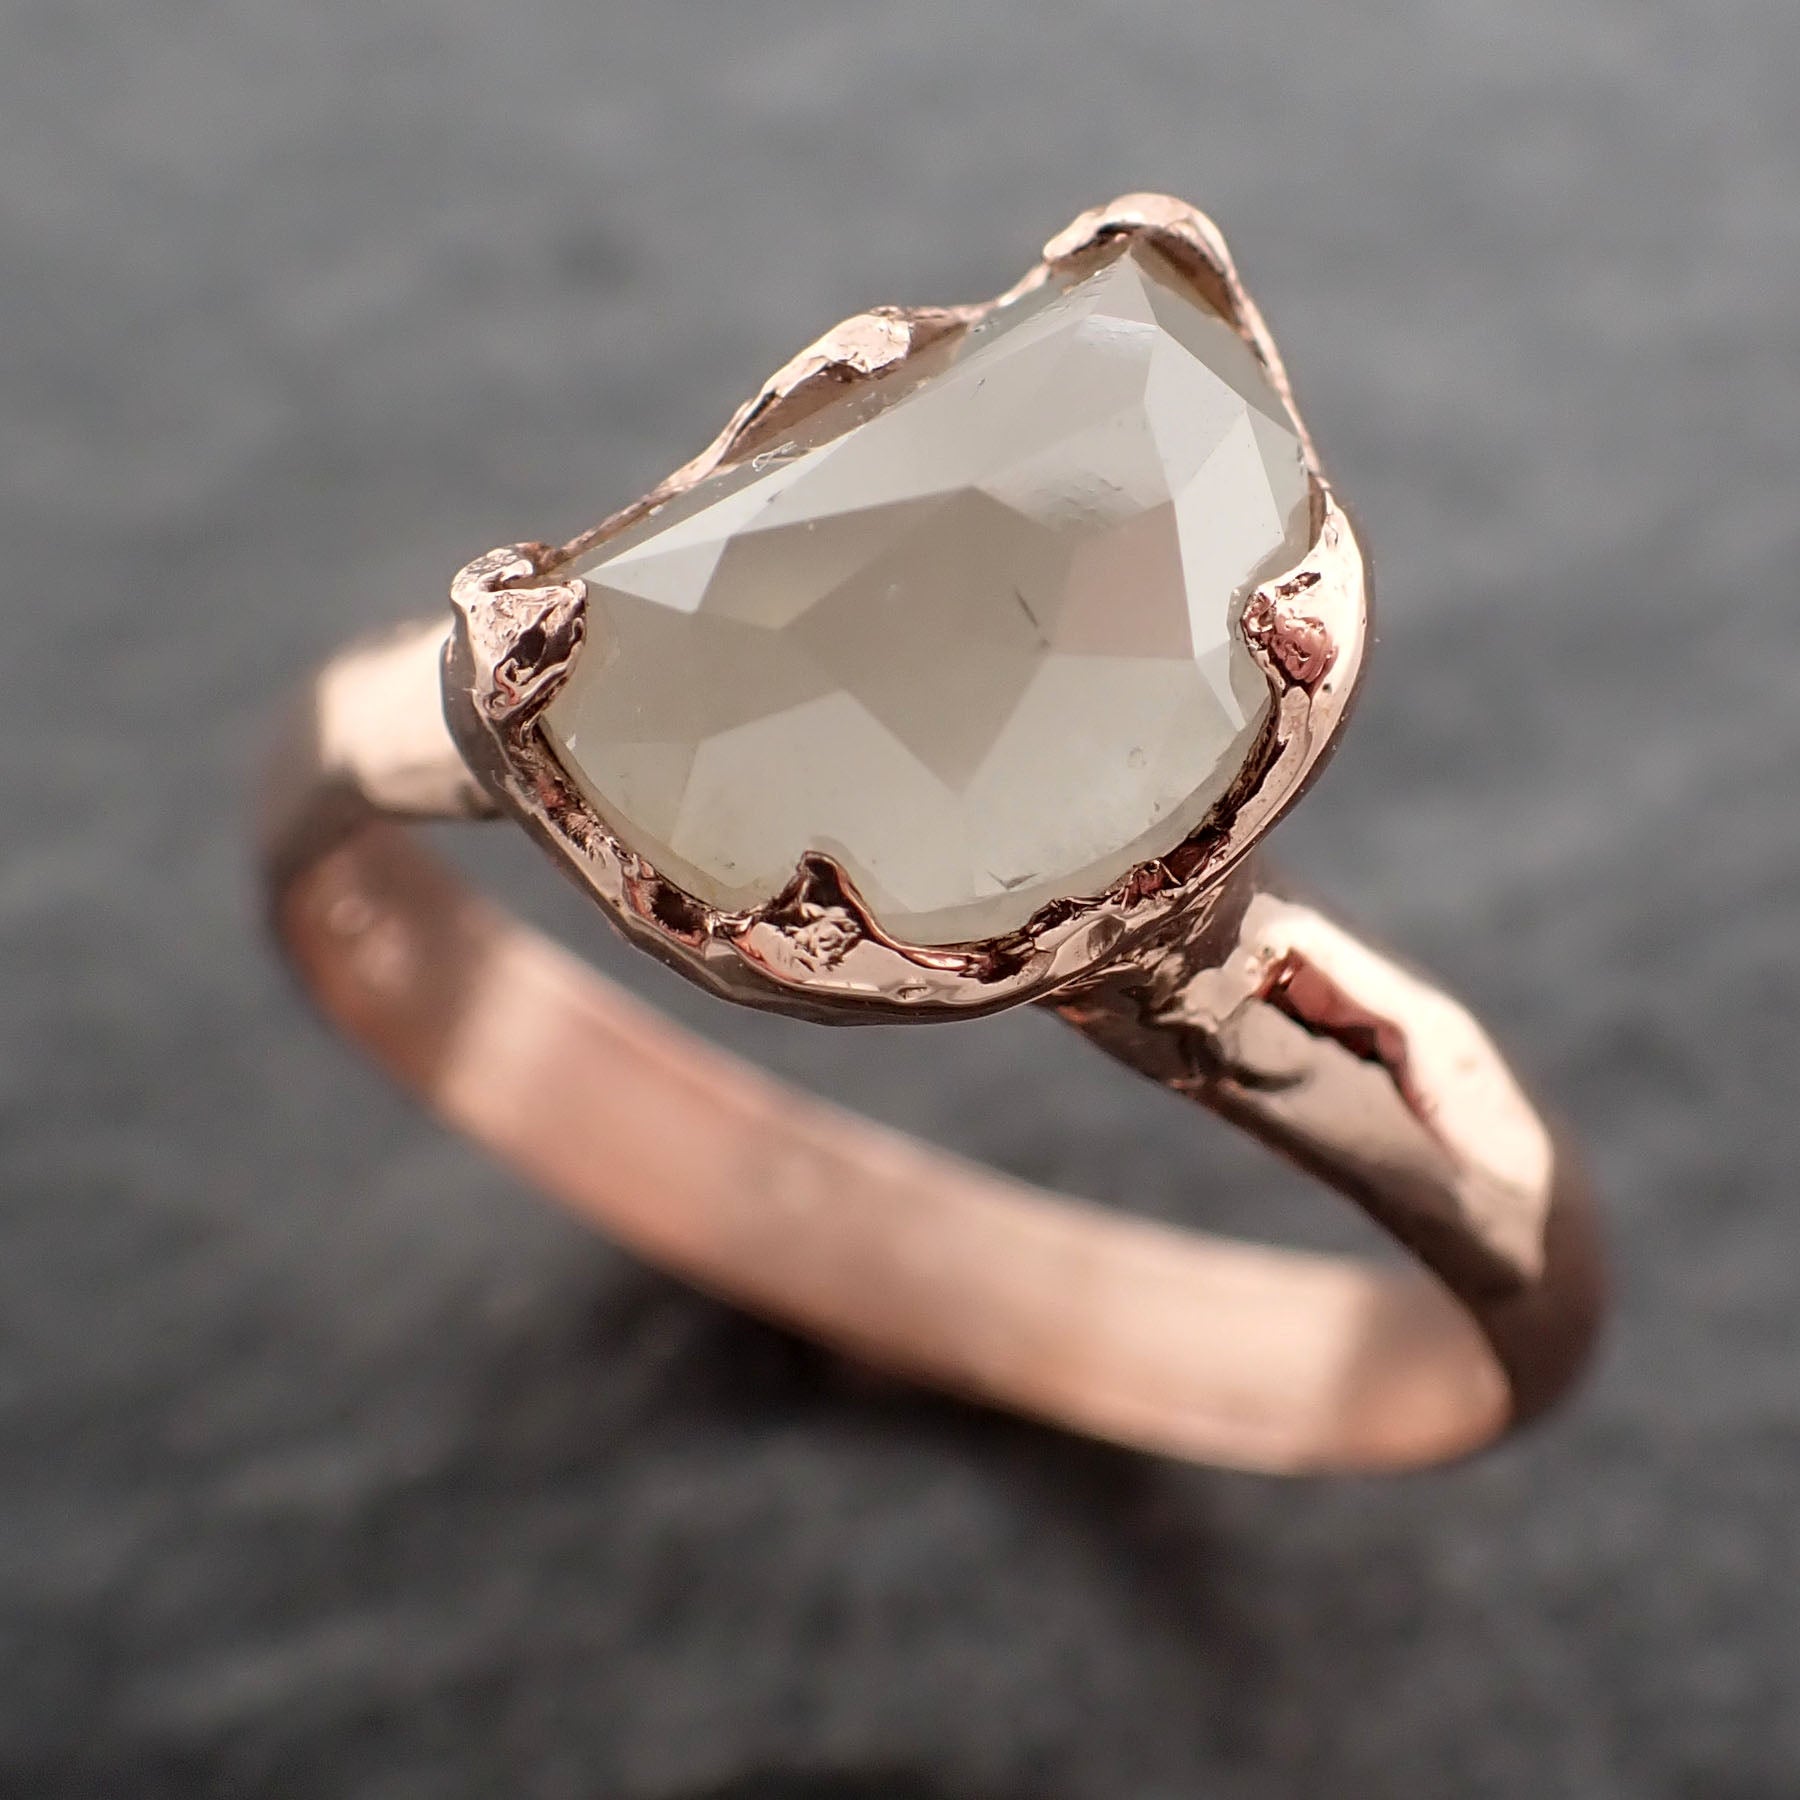 Faceted Fancy cut white Half Moon Diamond Engagement 14k Rose Gold Solitaire Wedding Ring byAngeline 2460